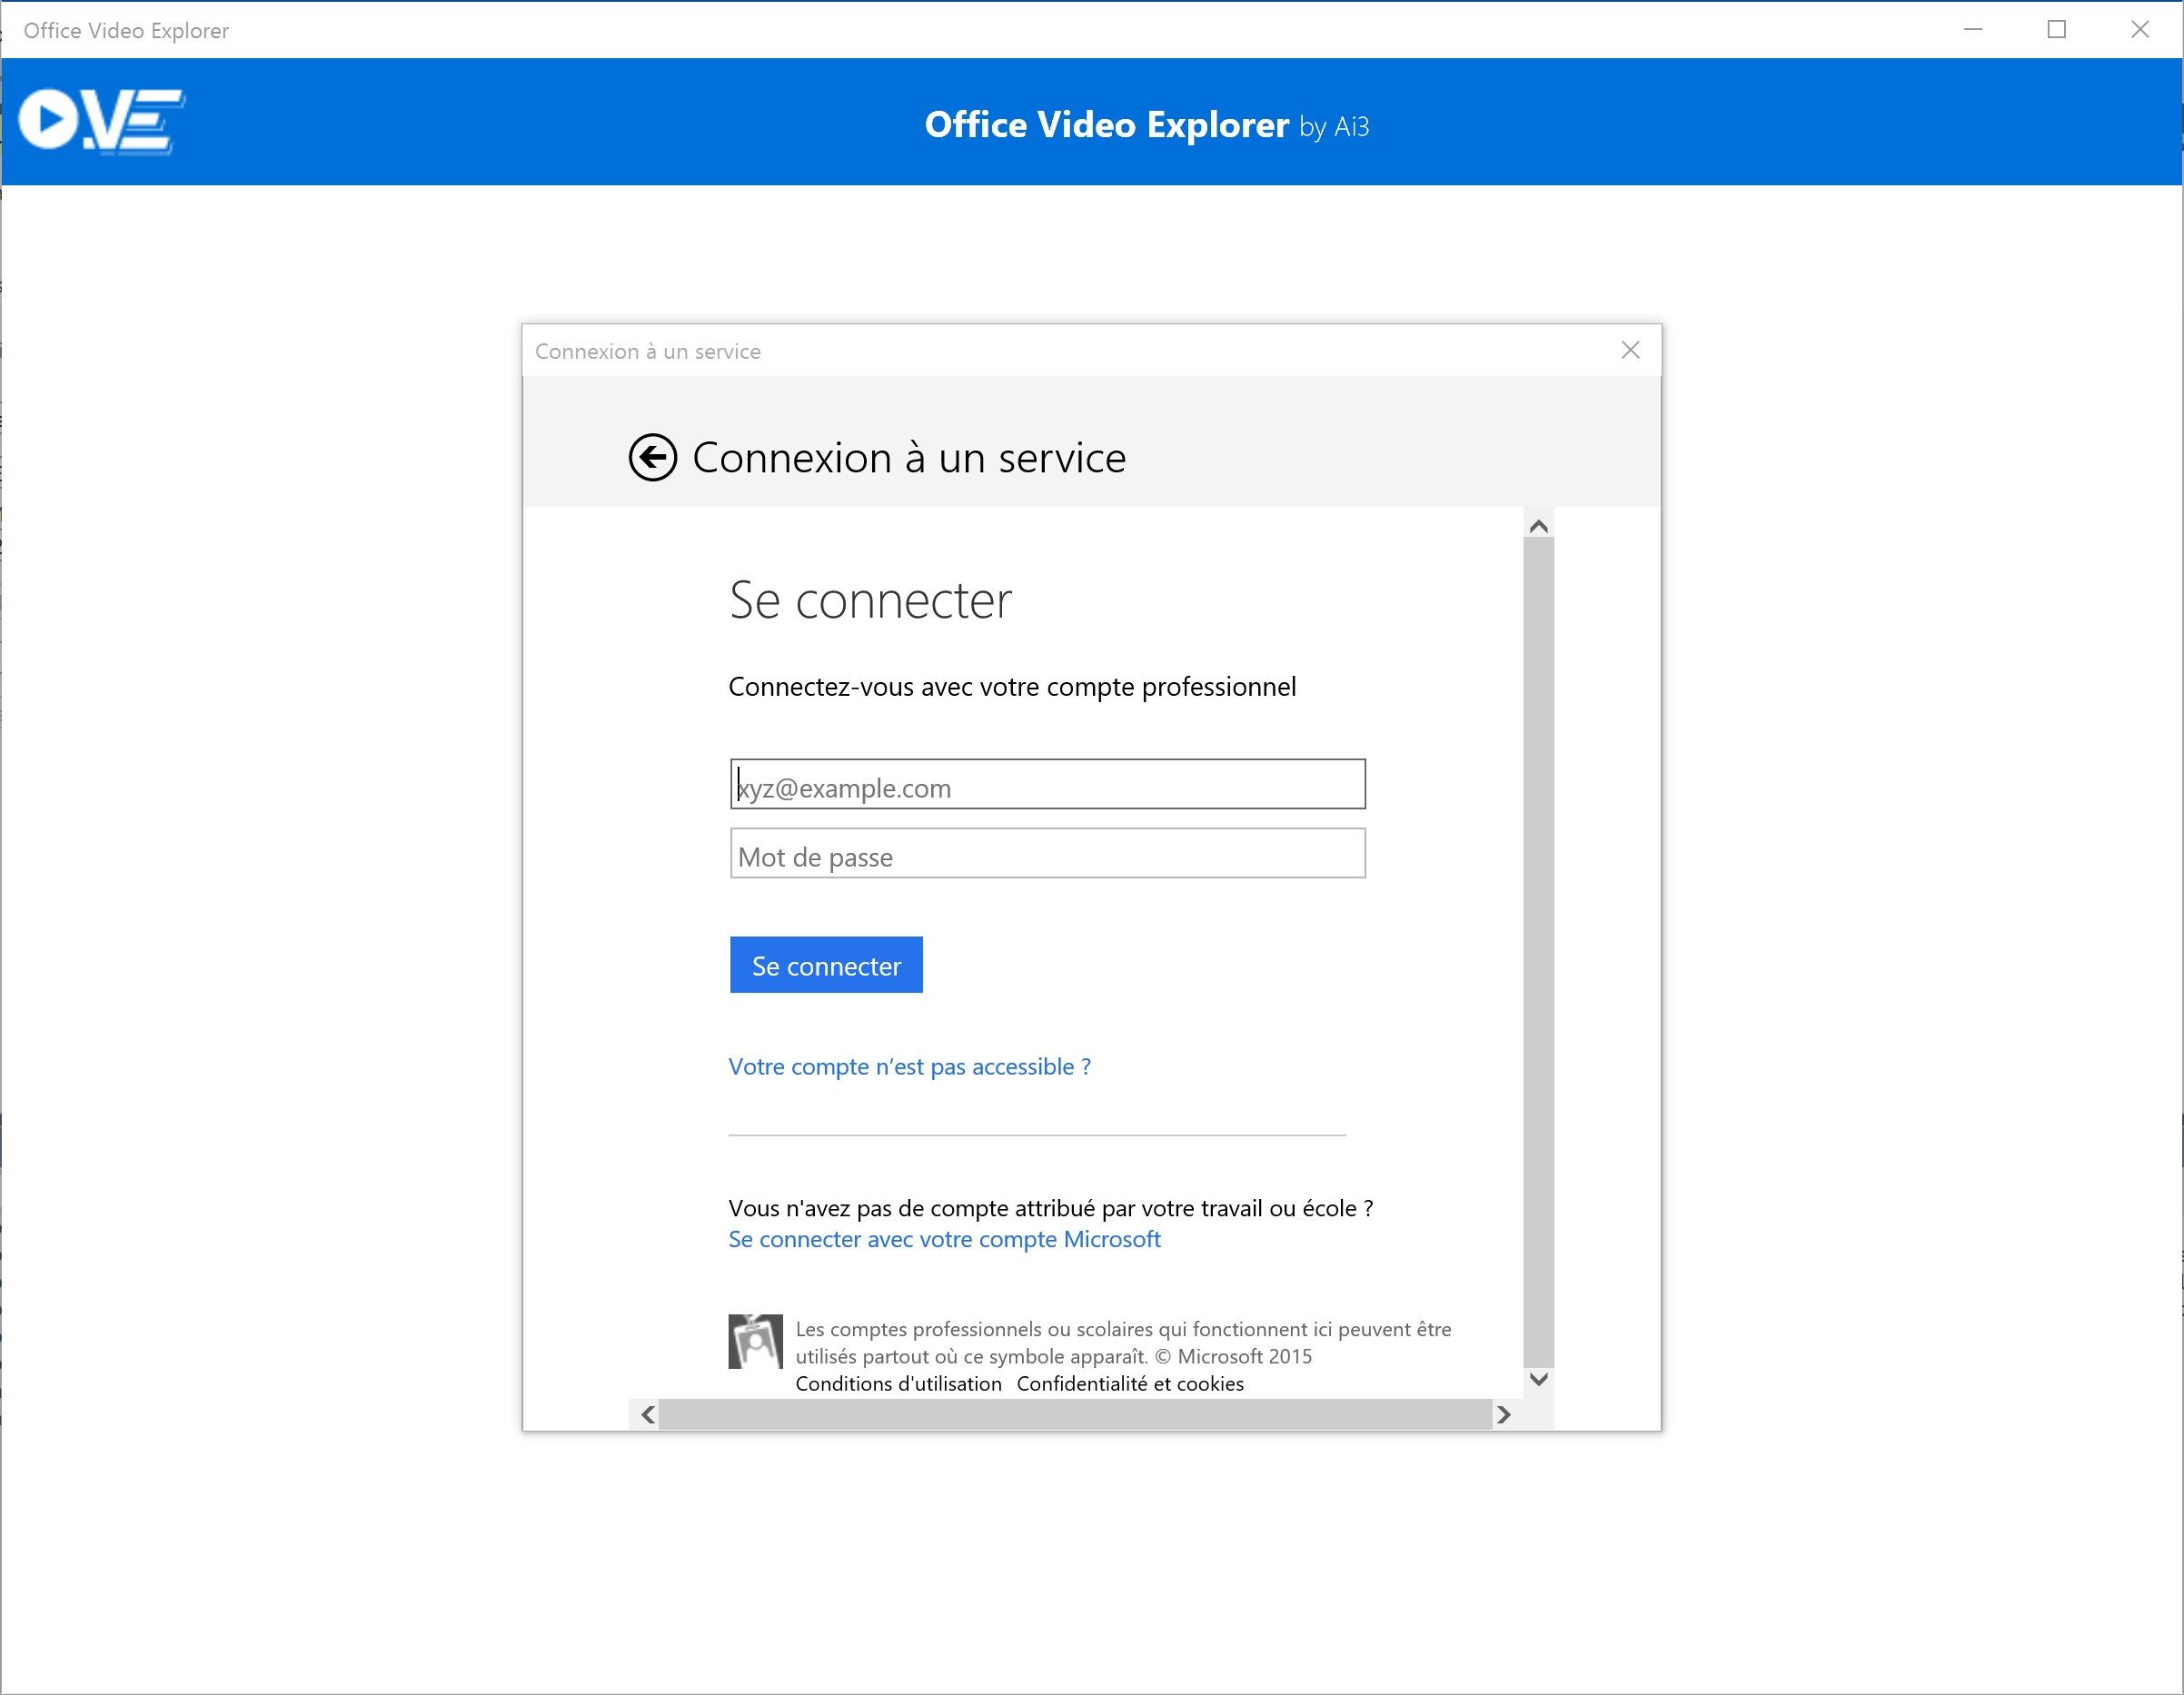 Log in with your Office 365 account